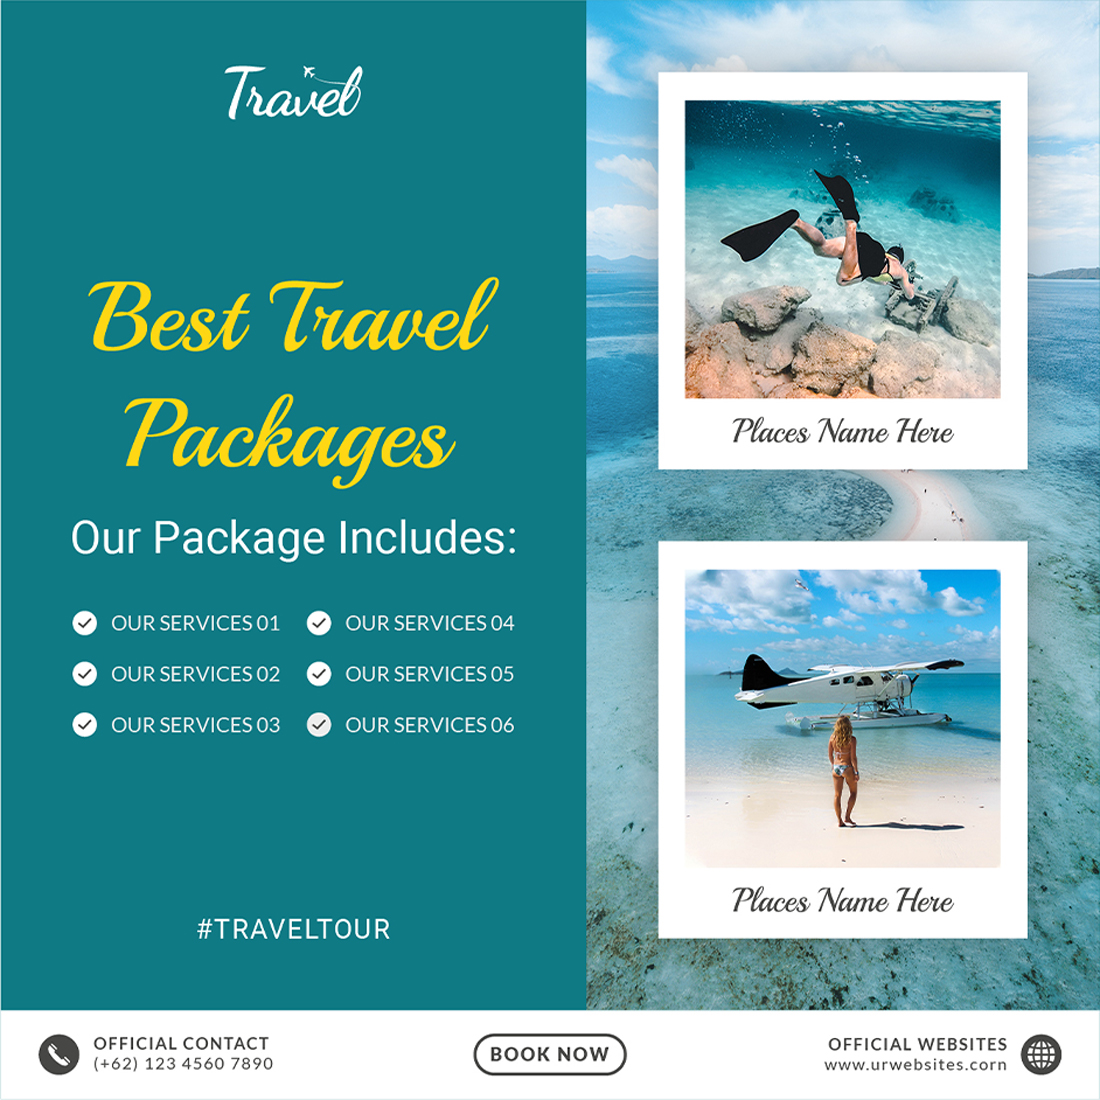 Leisure & Travel Social Media Post Templates best travel packages.